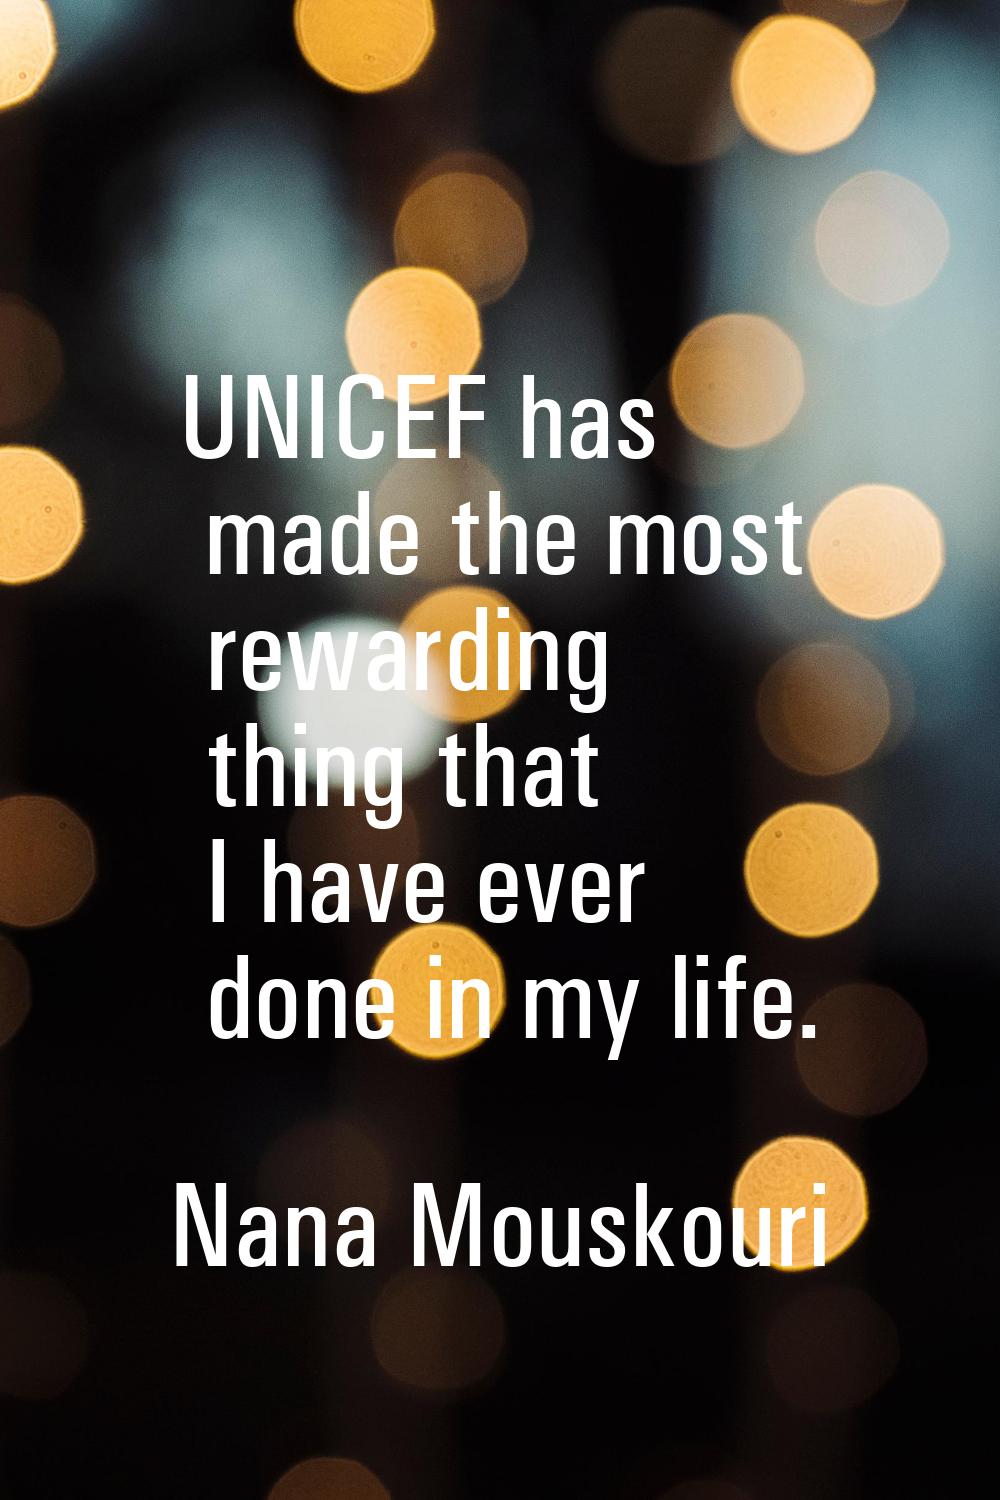 UNICEF has made the most rewarding thing that I have ever done in my life.